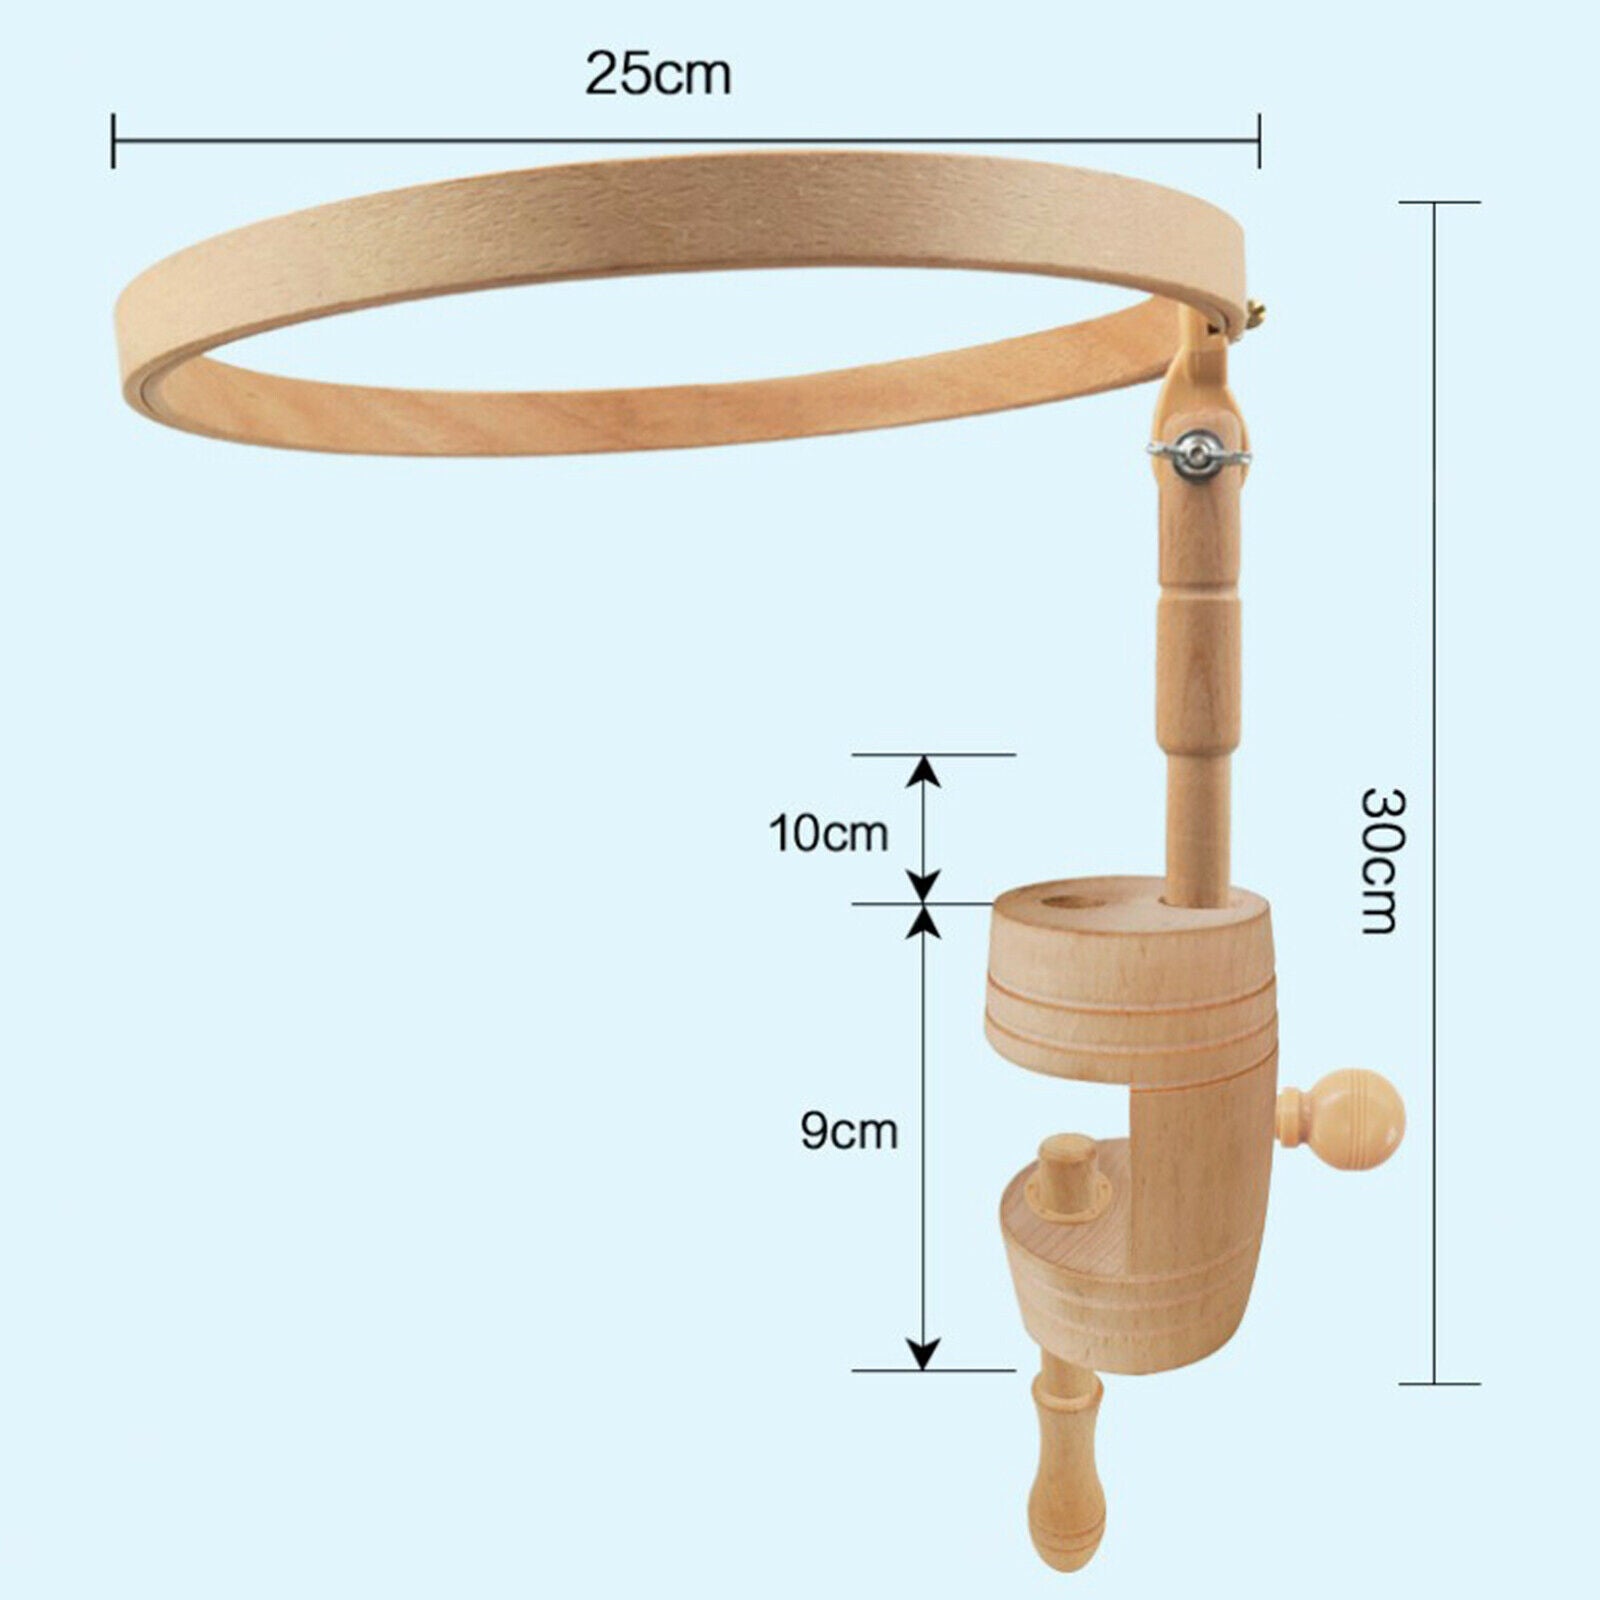 Wooden Adjustable Embroidery Hoop Holder Stand Cross Stitch Rack Sewing Tool